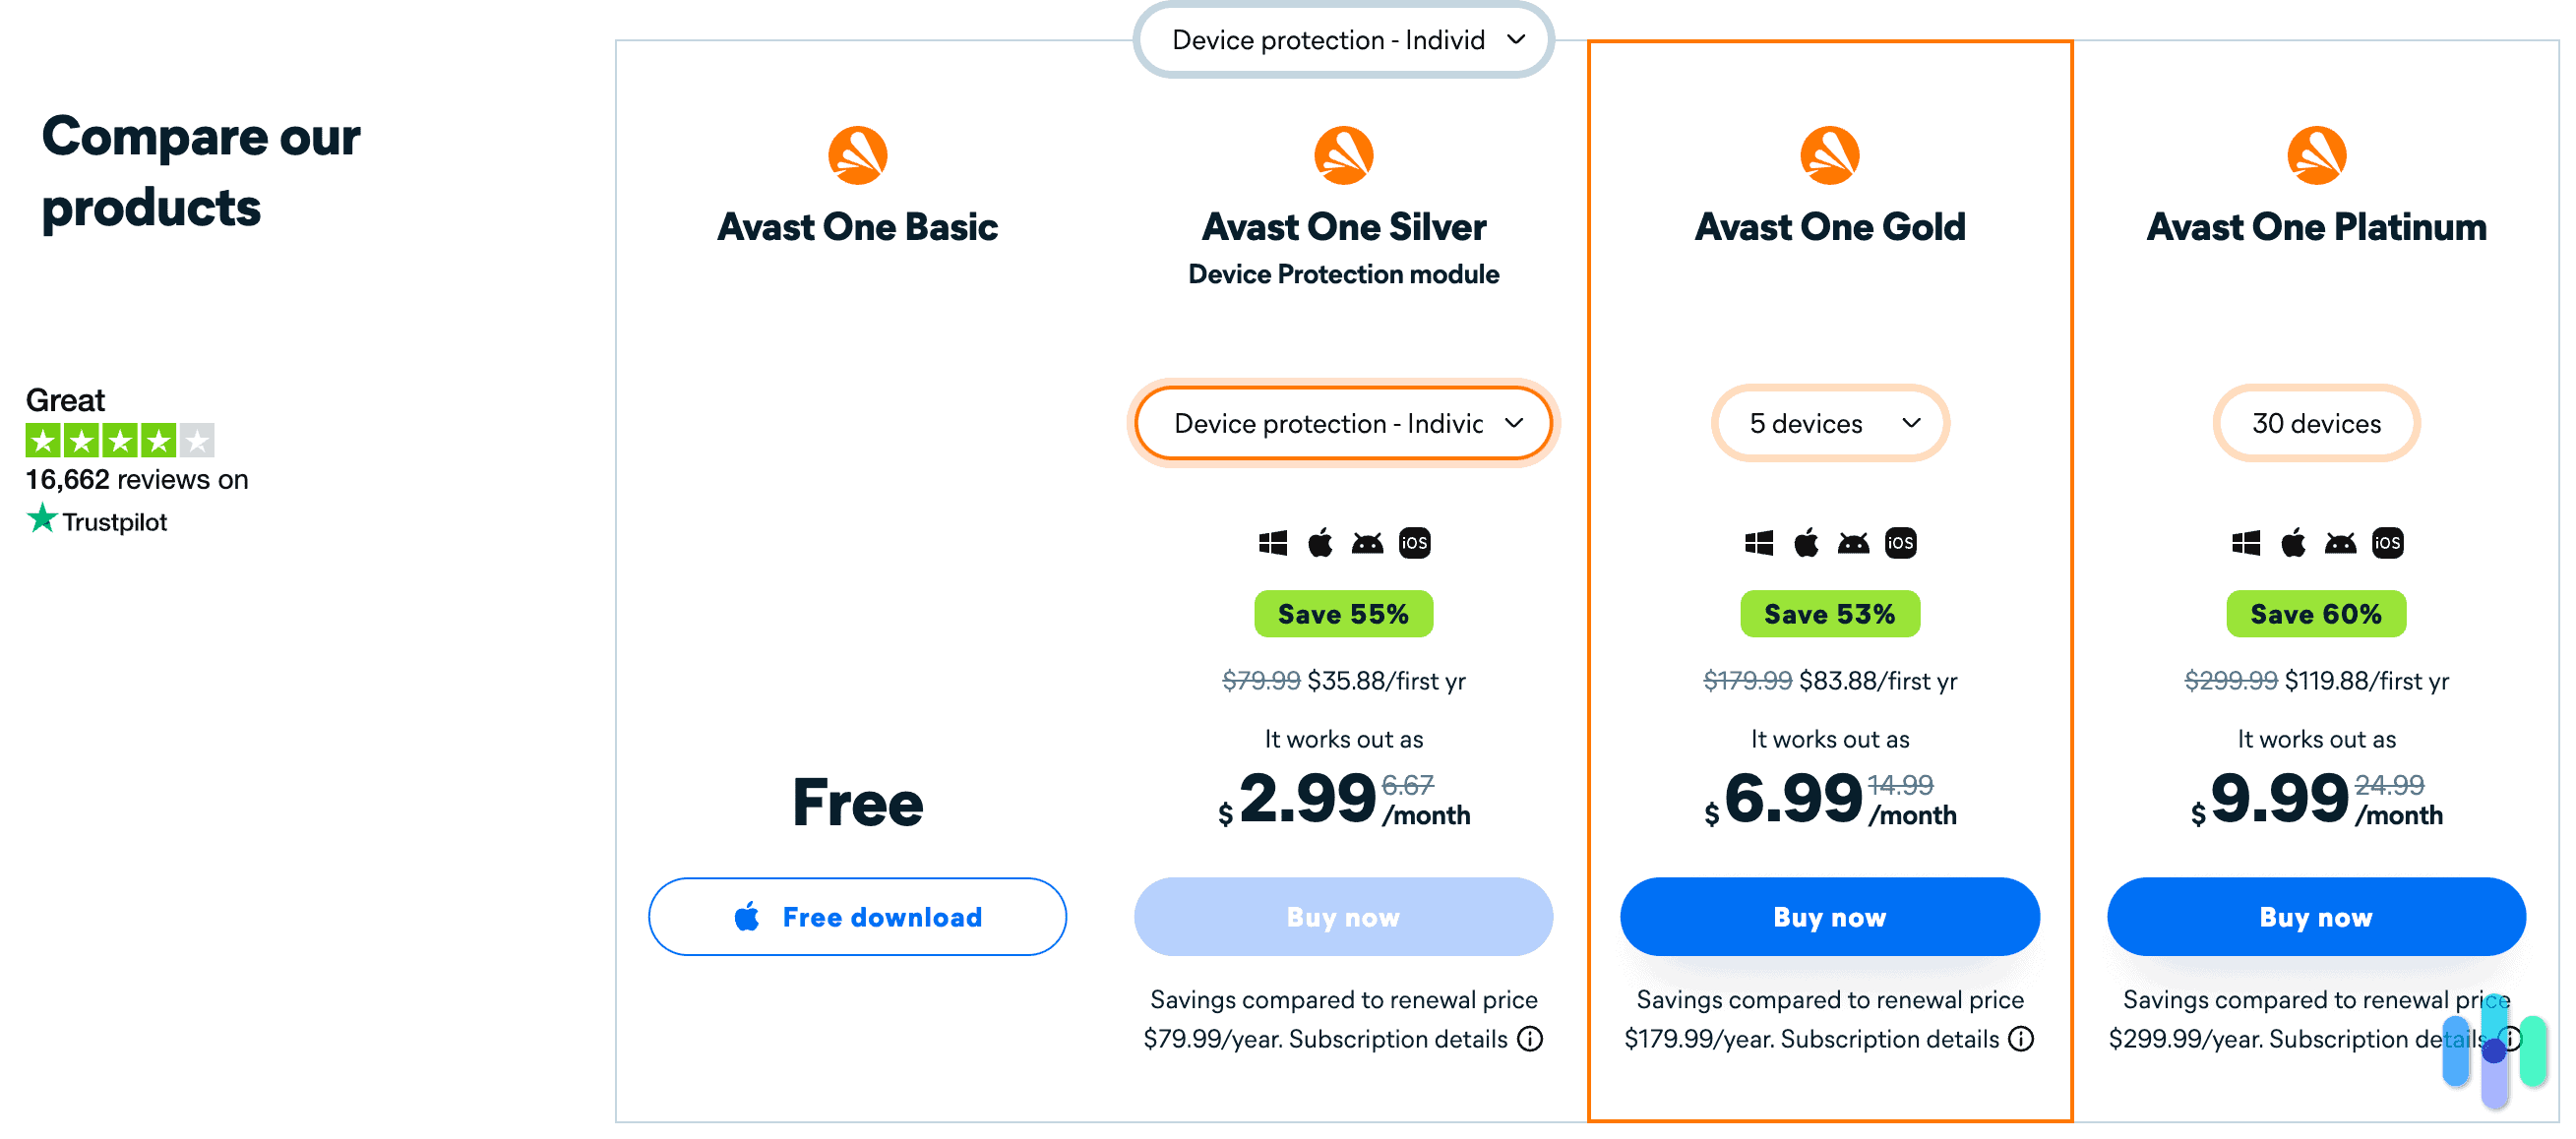 Avast prices and plans